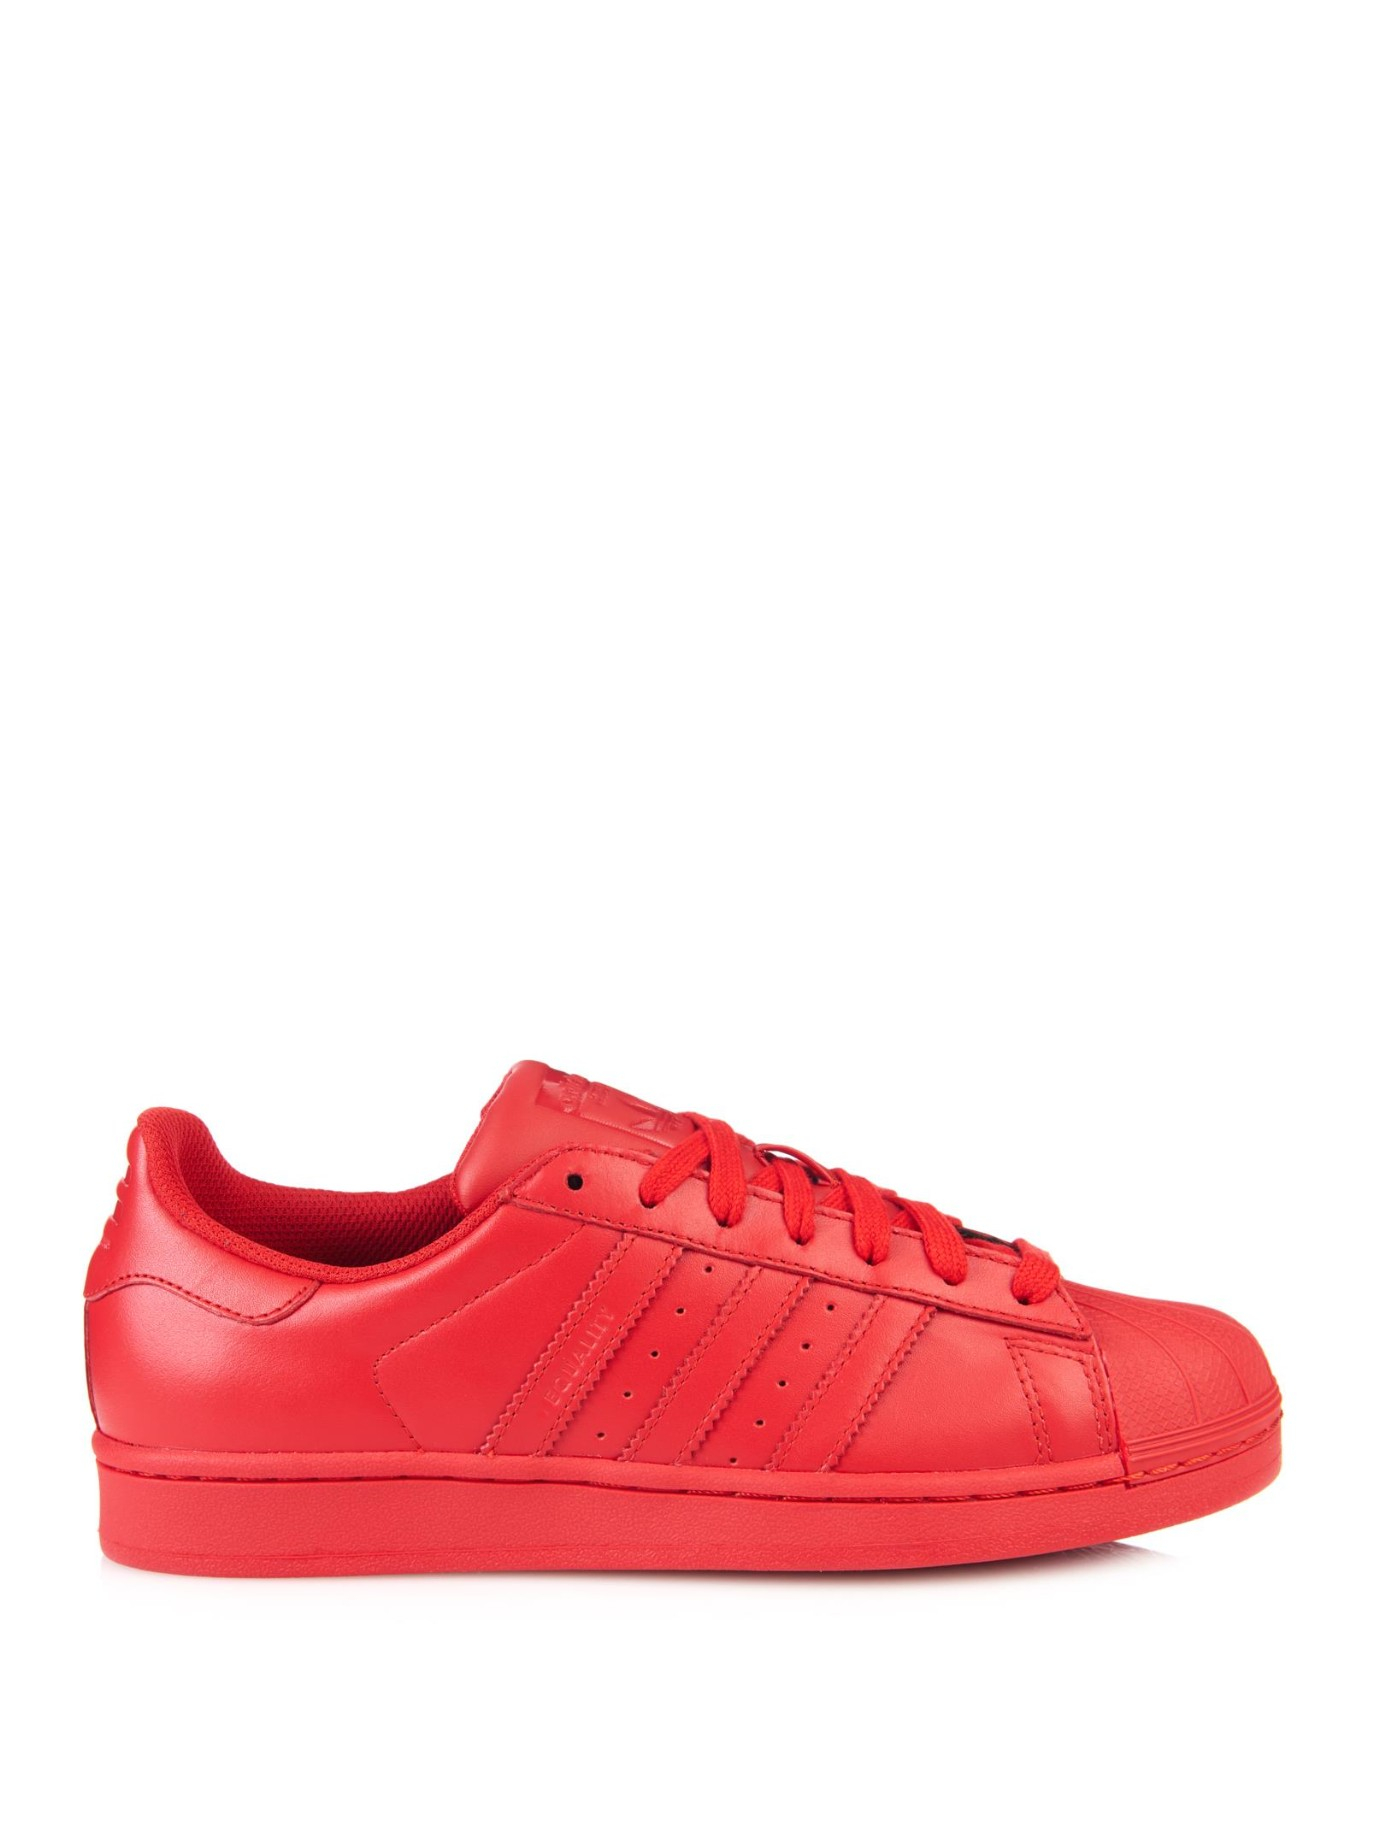 adidas Superstar Supercolor Leather Trainers in Red | Lyst